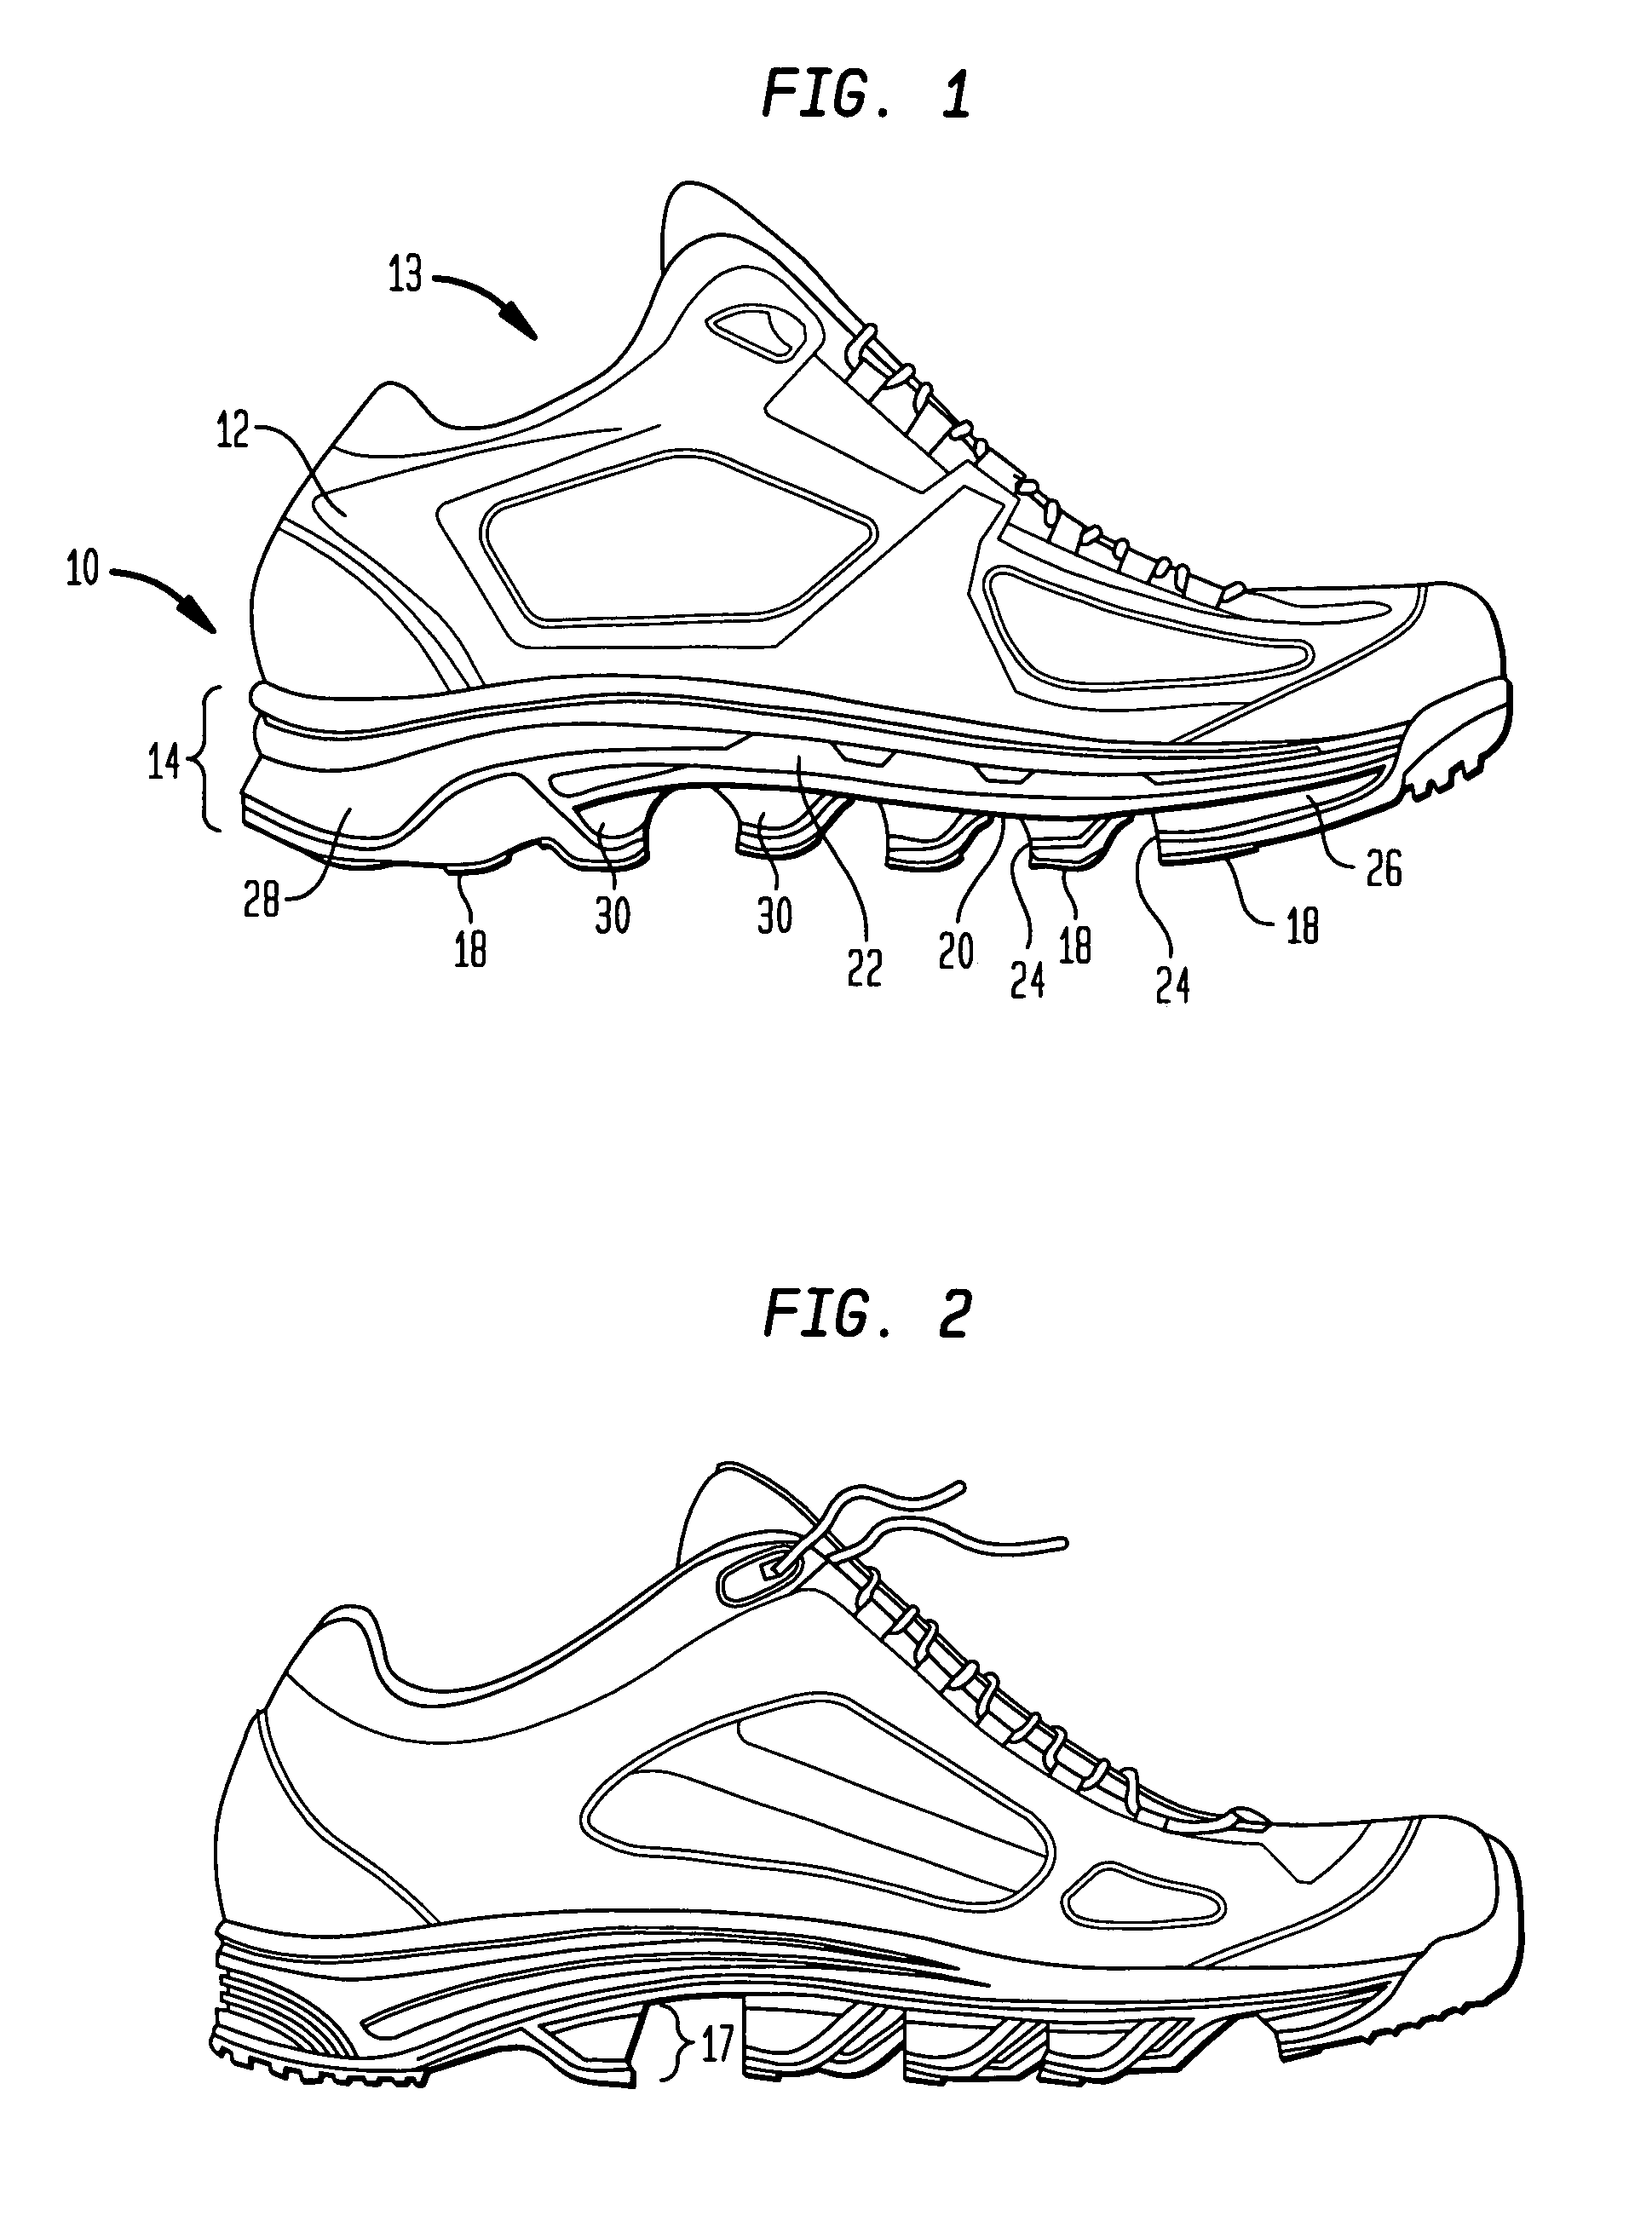 Footwear with independent suspension and protection